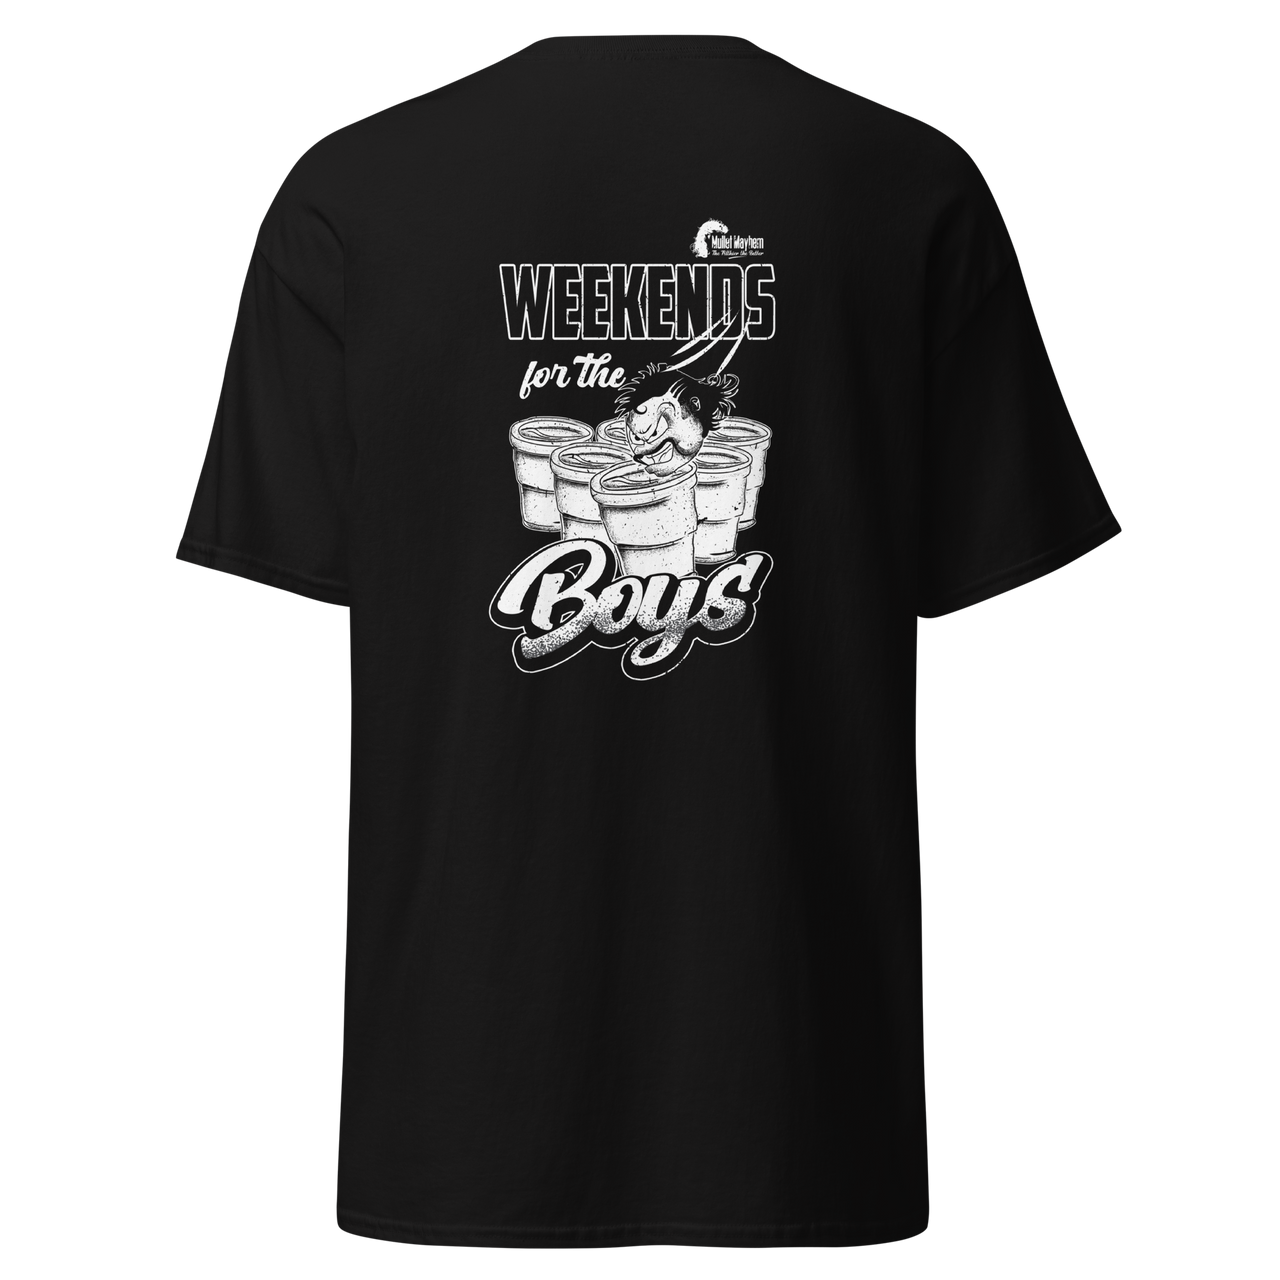 Weekends for the Boys-shots (t-shirt)